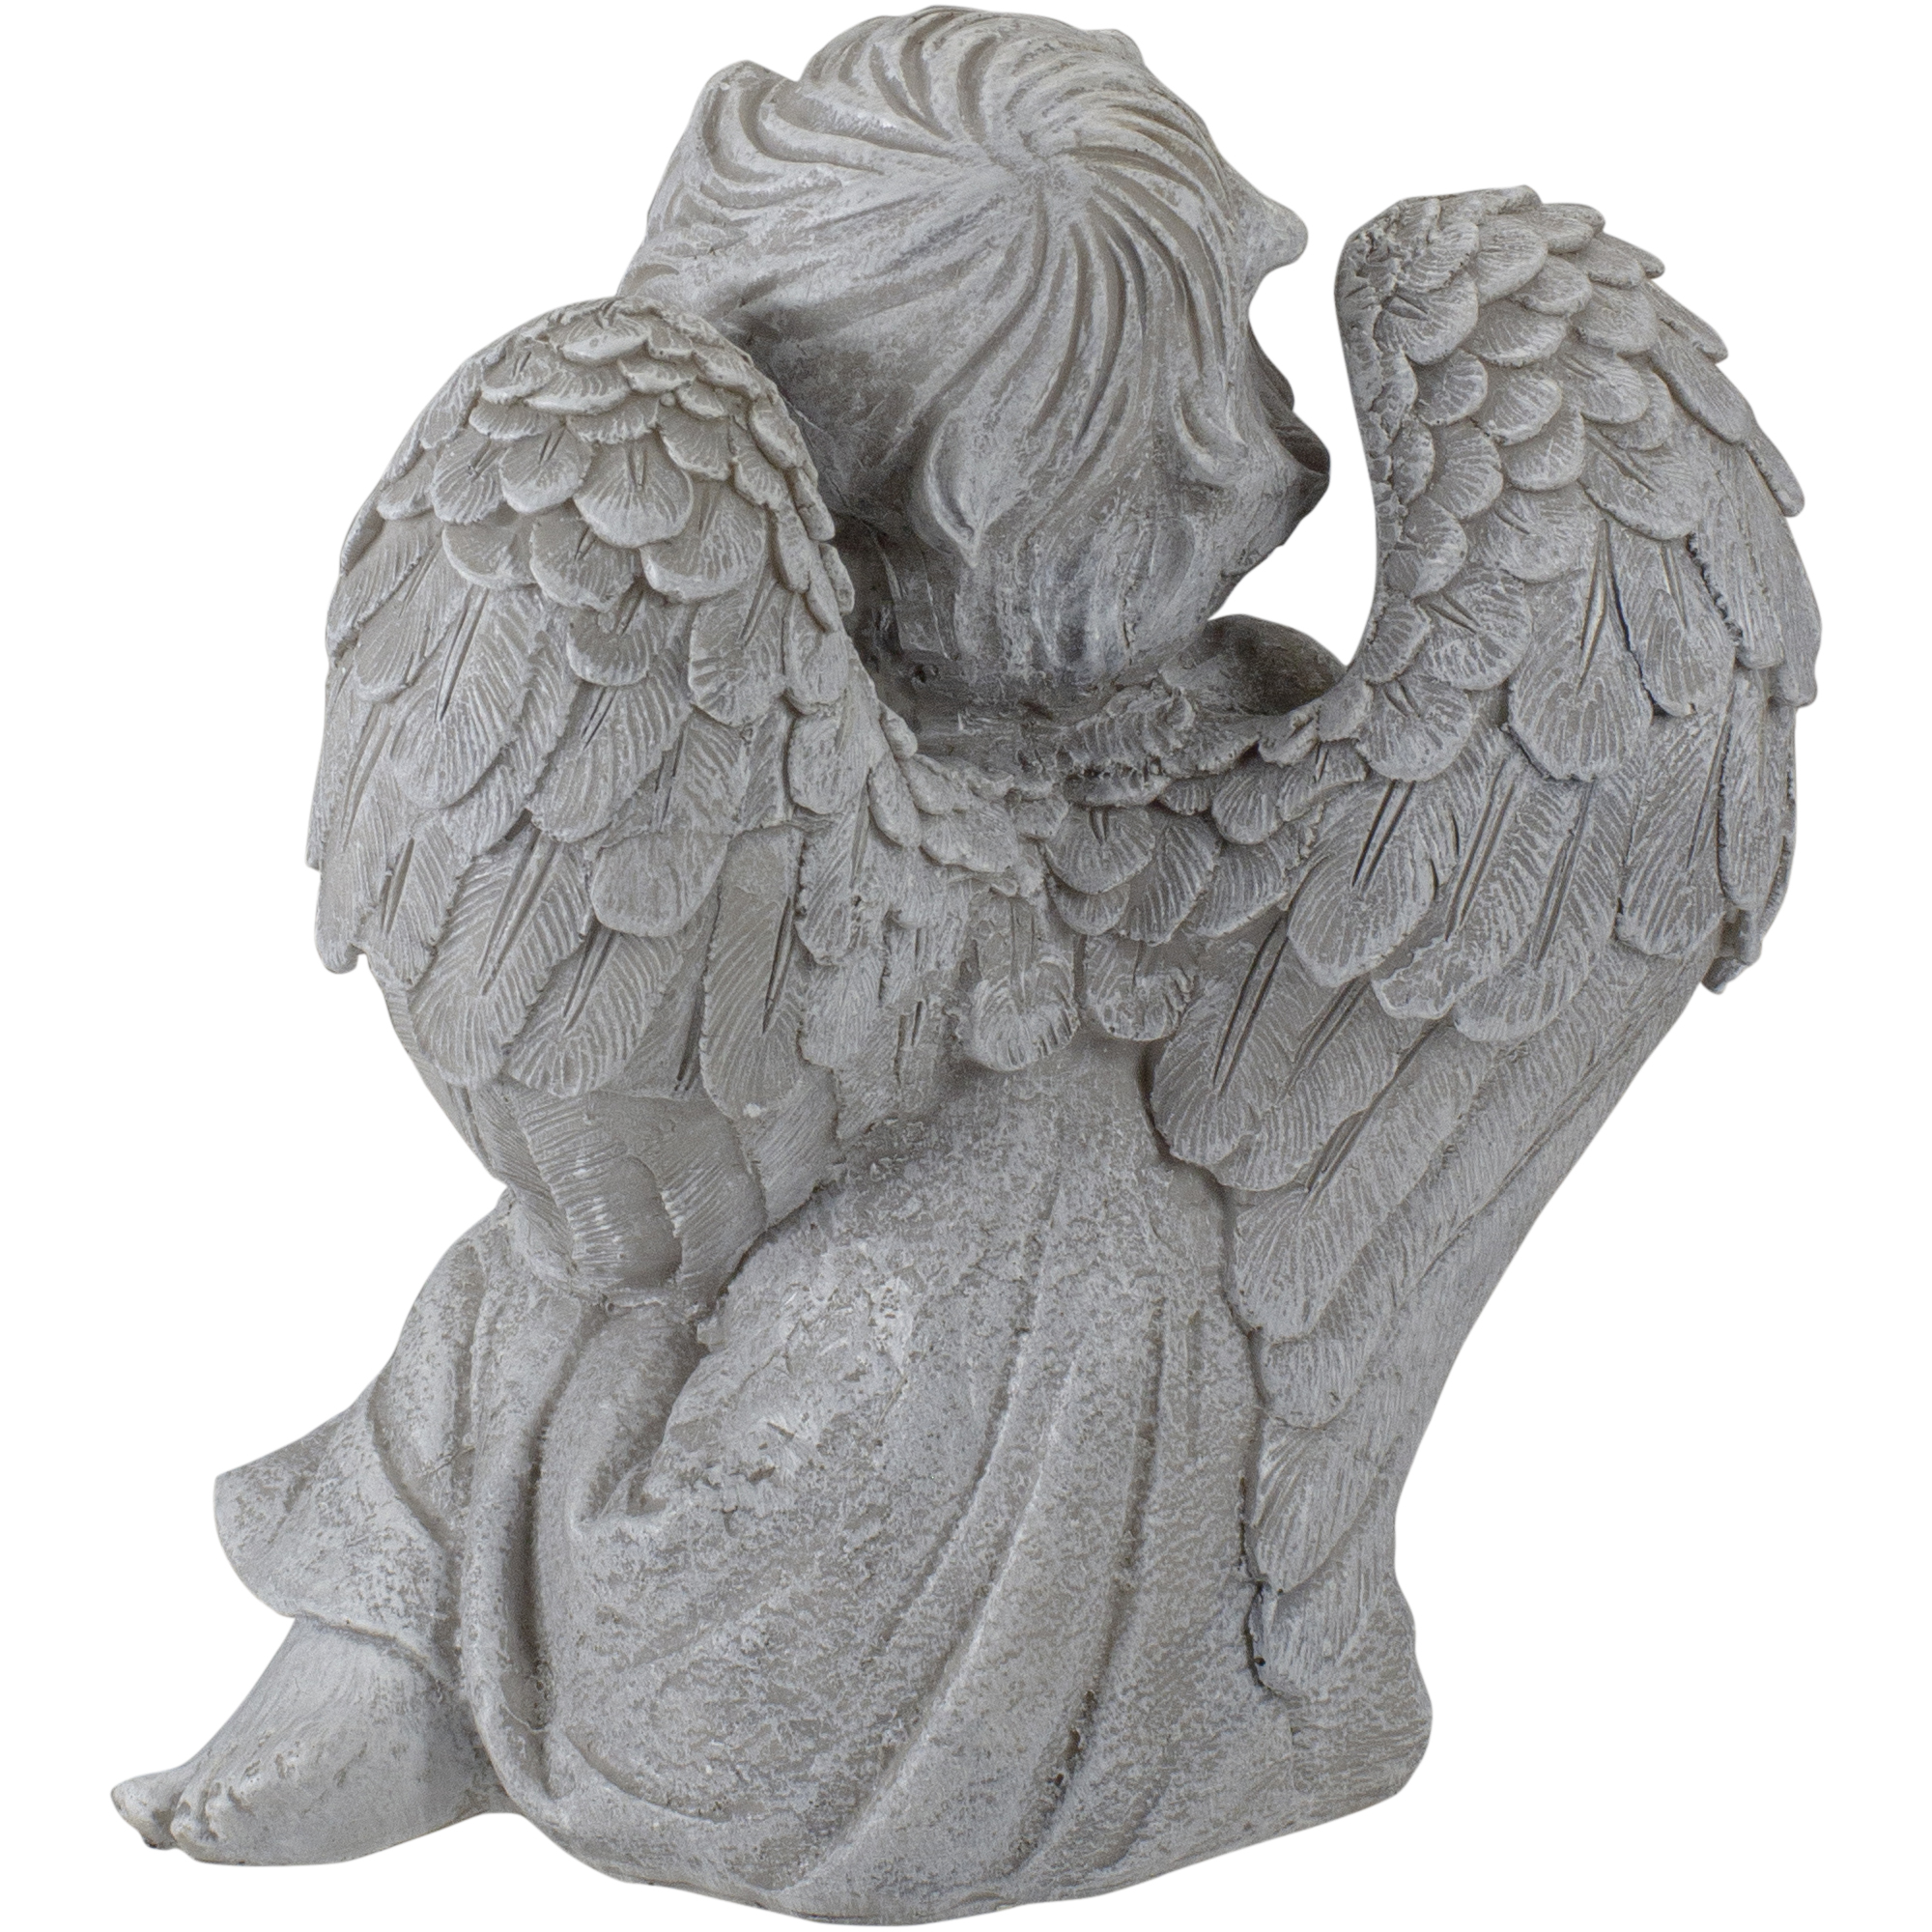 Northlight 8.75" Gray Sitting  Angel with Wings Outdoor Garden Statue - image 4 of 5